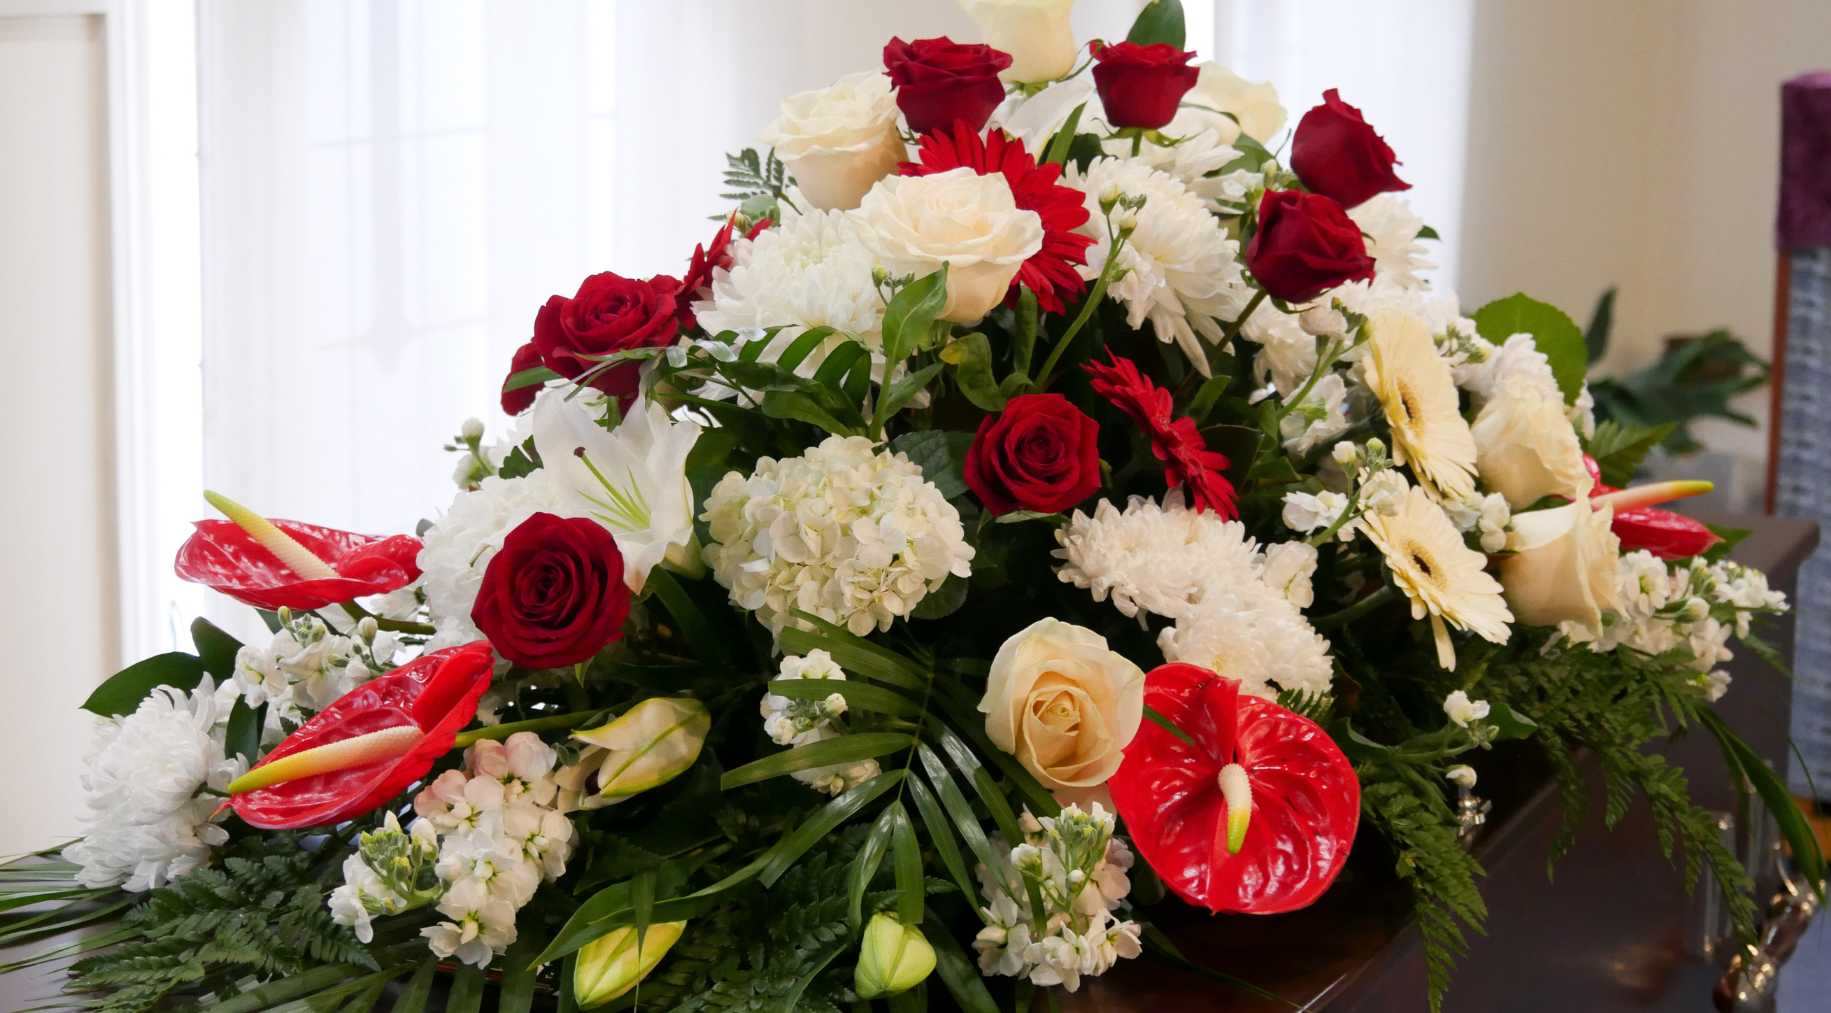 Large funeral flower arrangement with roses.